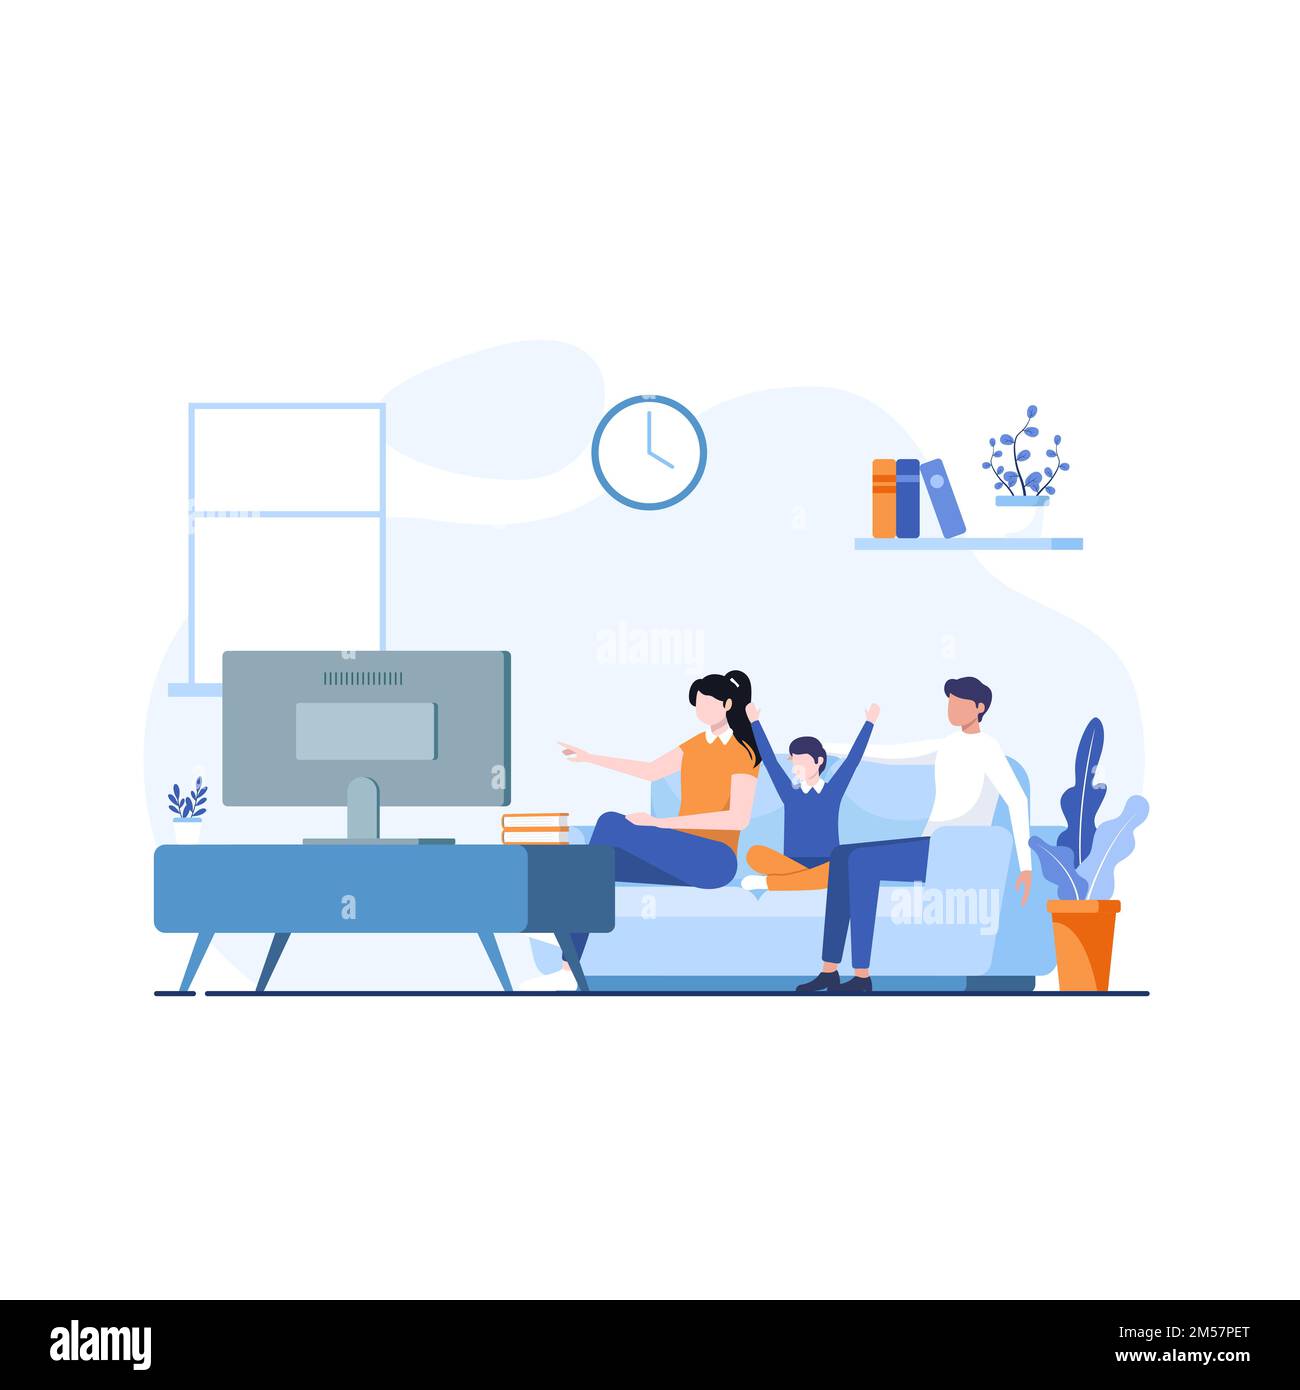 Family Watching tv show. Father Mother and Son watching television and having fun together. Happiness in family concept flat design for web applicatio Stock Vector